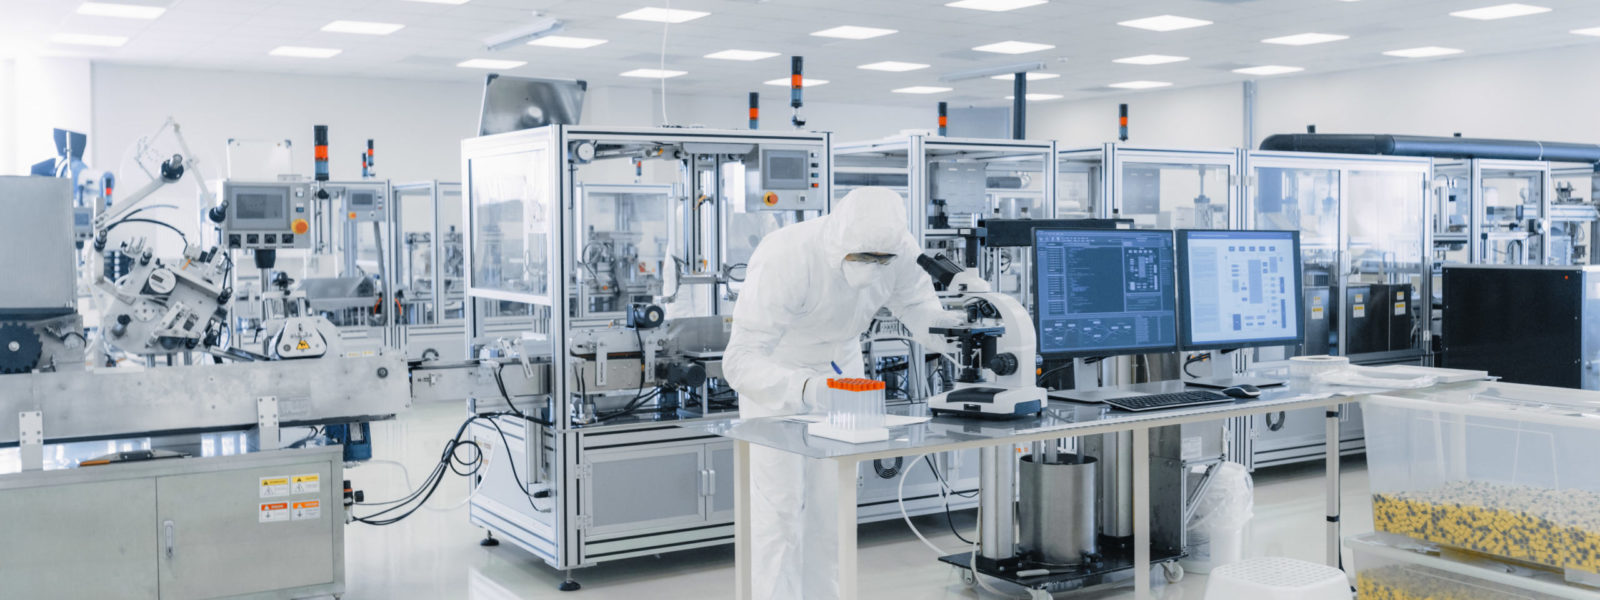 Shot of Sterile Pharmaceutical Manufacturing Laboratory where Scientists in Protective Coverall’s Do Research, Quality Control and Work on the Discovery of new Medicine.